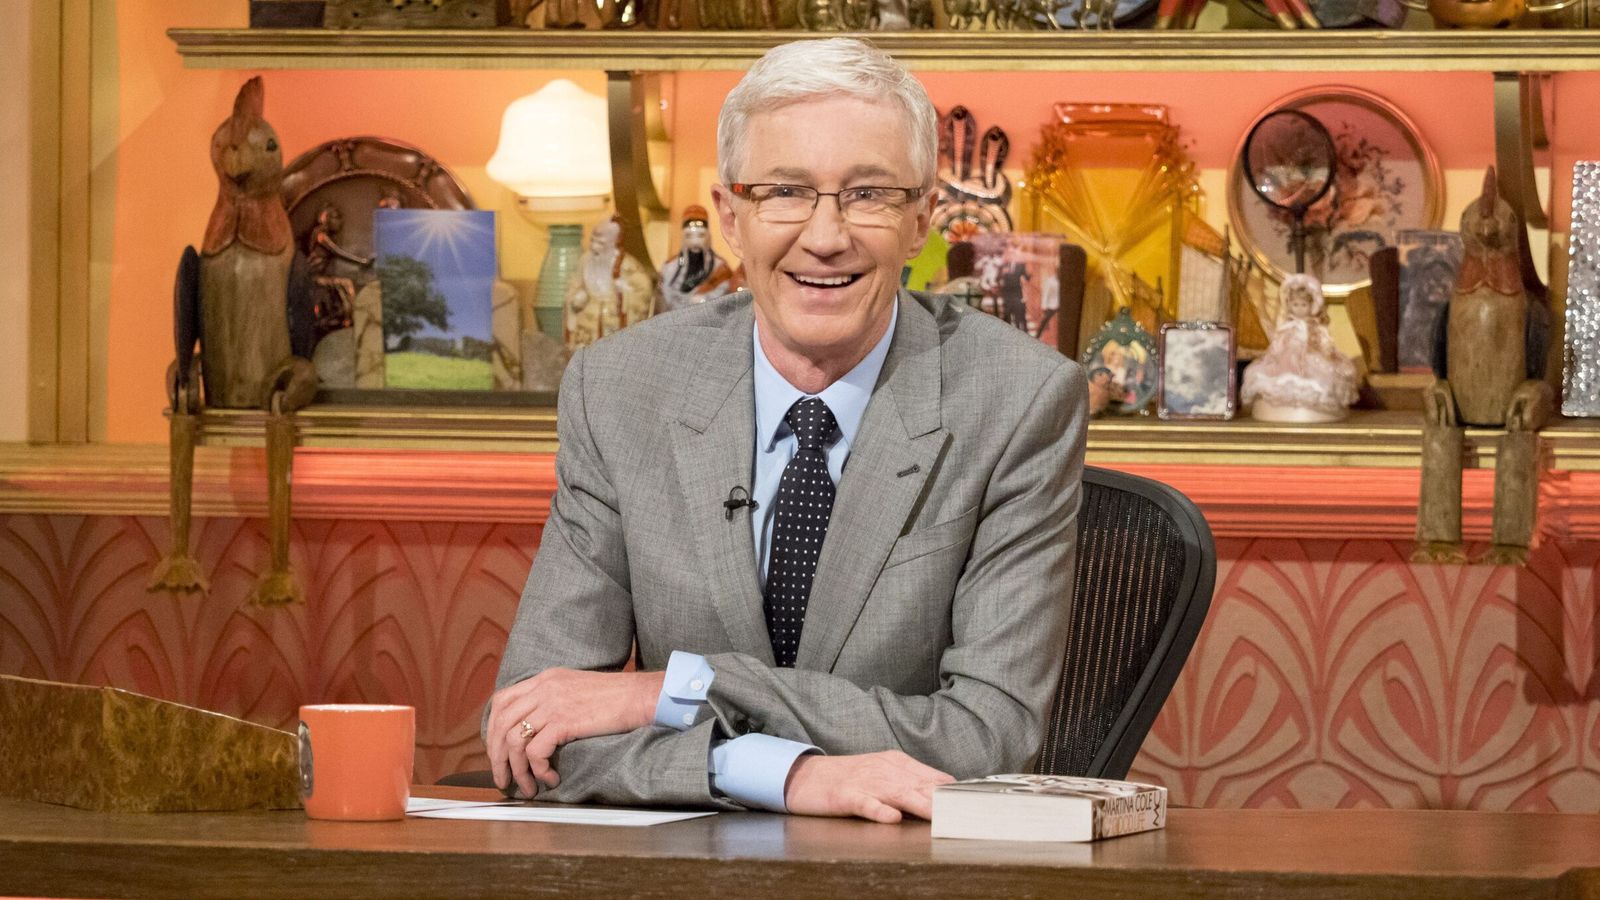 Paul O'Grady, TV star and comedian, dies 'unexpectedly'